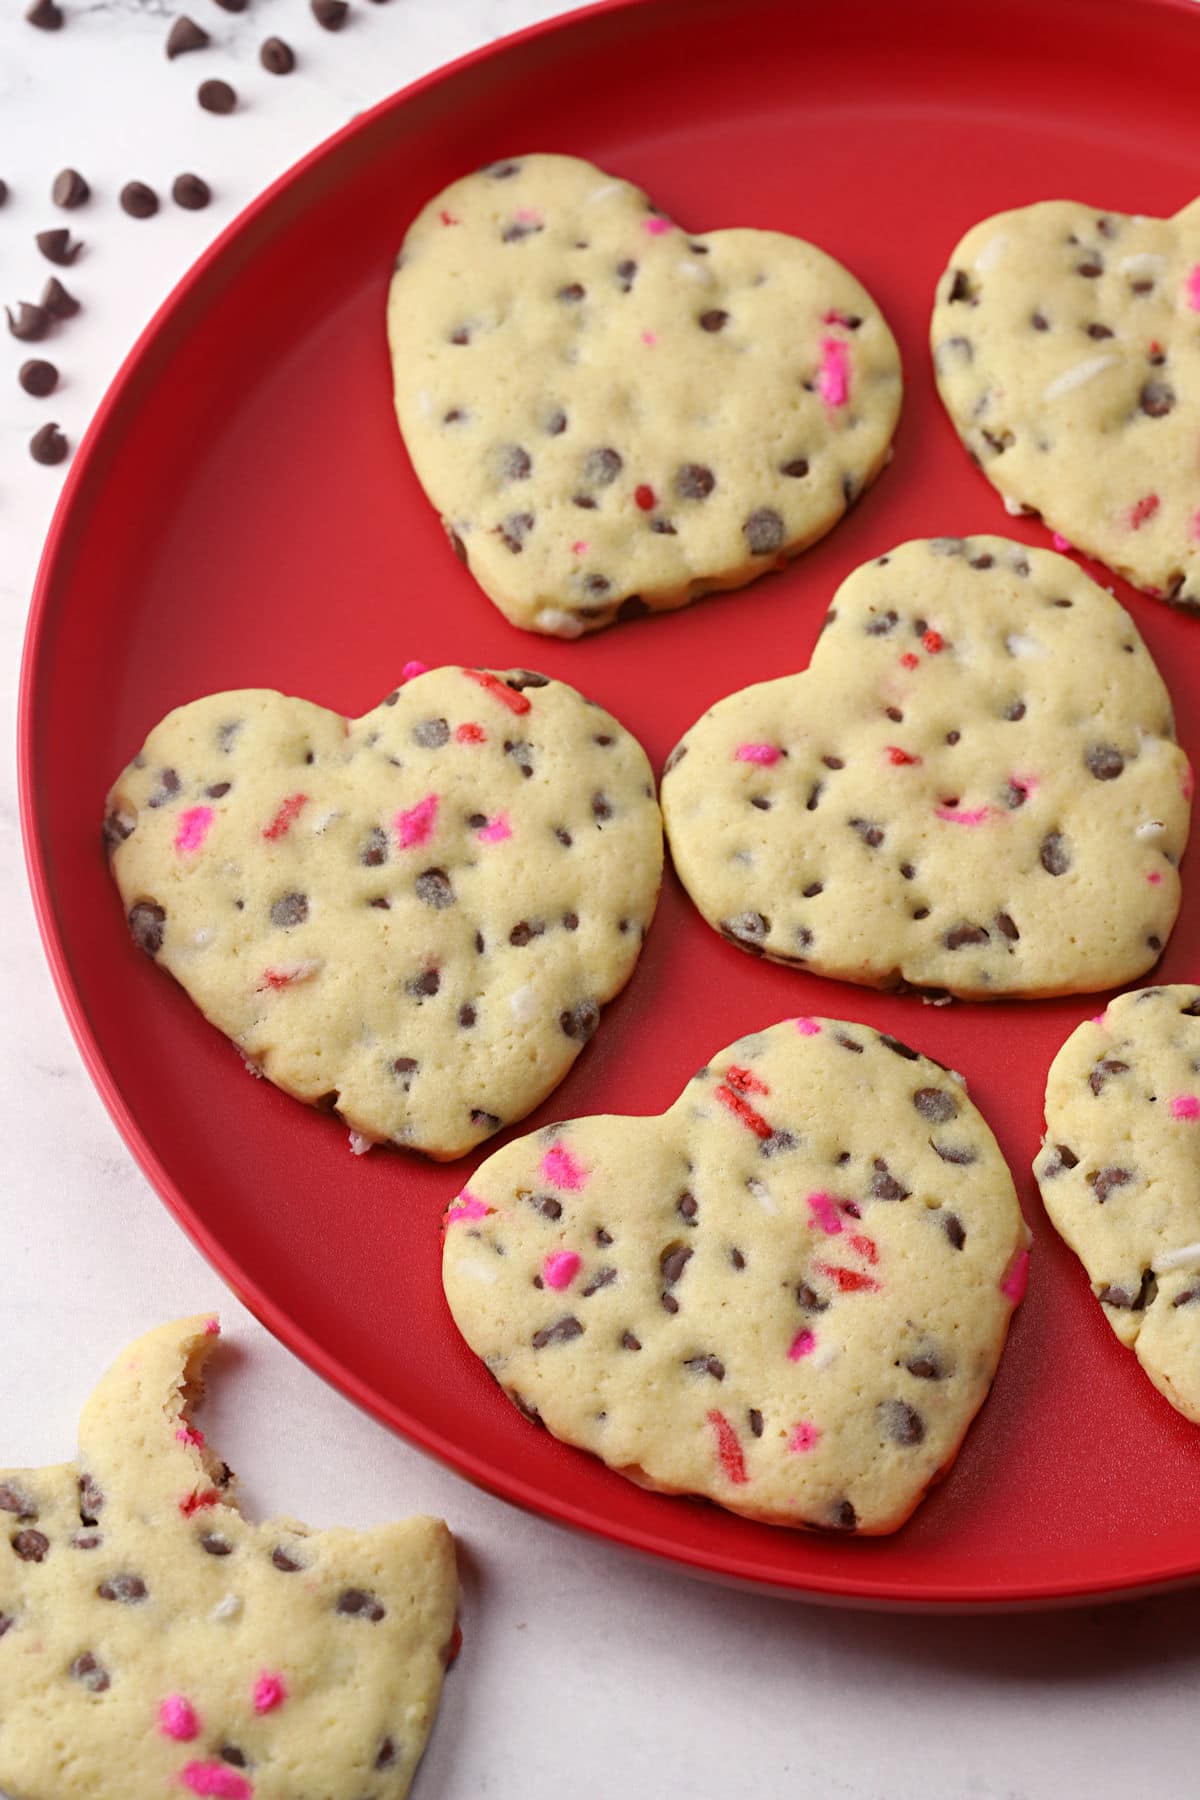 Heart shaped chocolate chip cookies on a red plate.